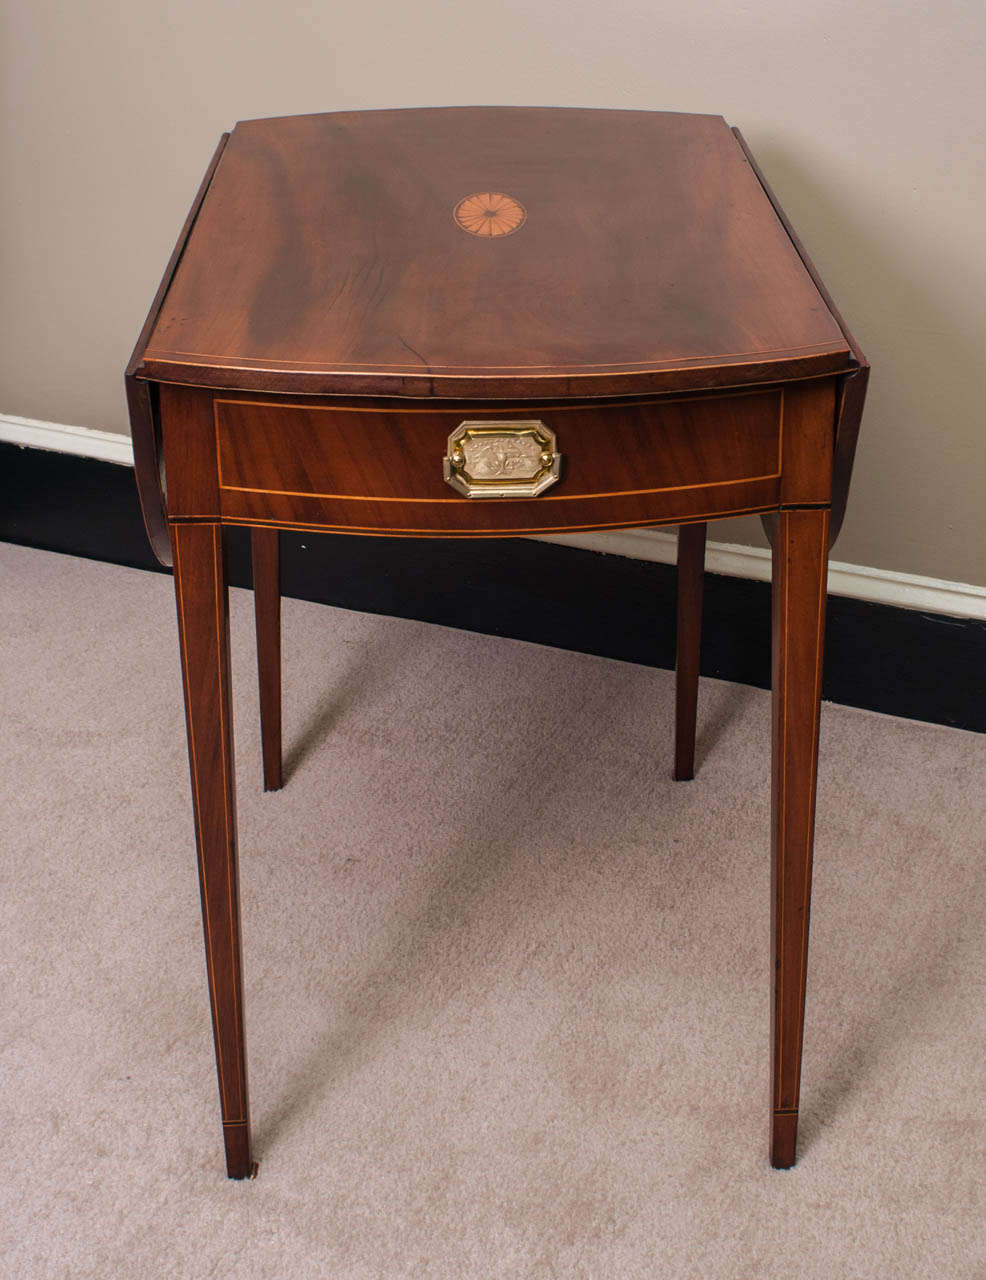 This Hepplewhite-design one-drawer dropleaf table was made by a master cabinetmaker probably in  Rhode Island - the proportions are excellent - the bowed ends with the leaves up make a beautifully proportioned oval top (31.75